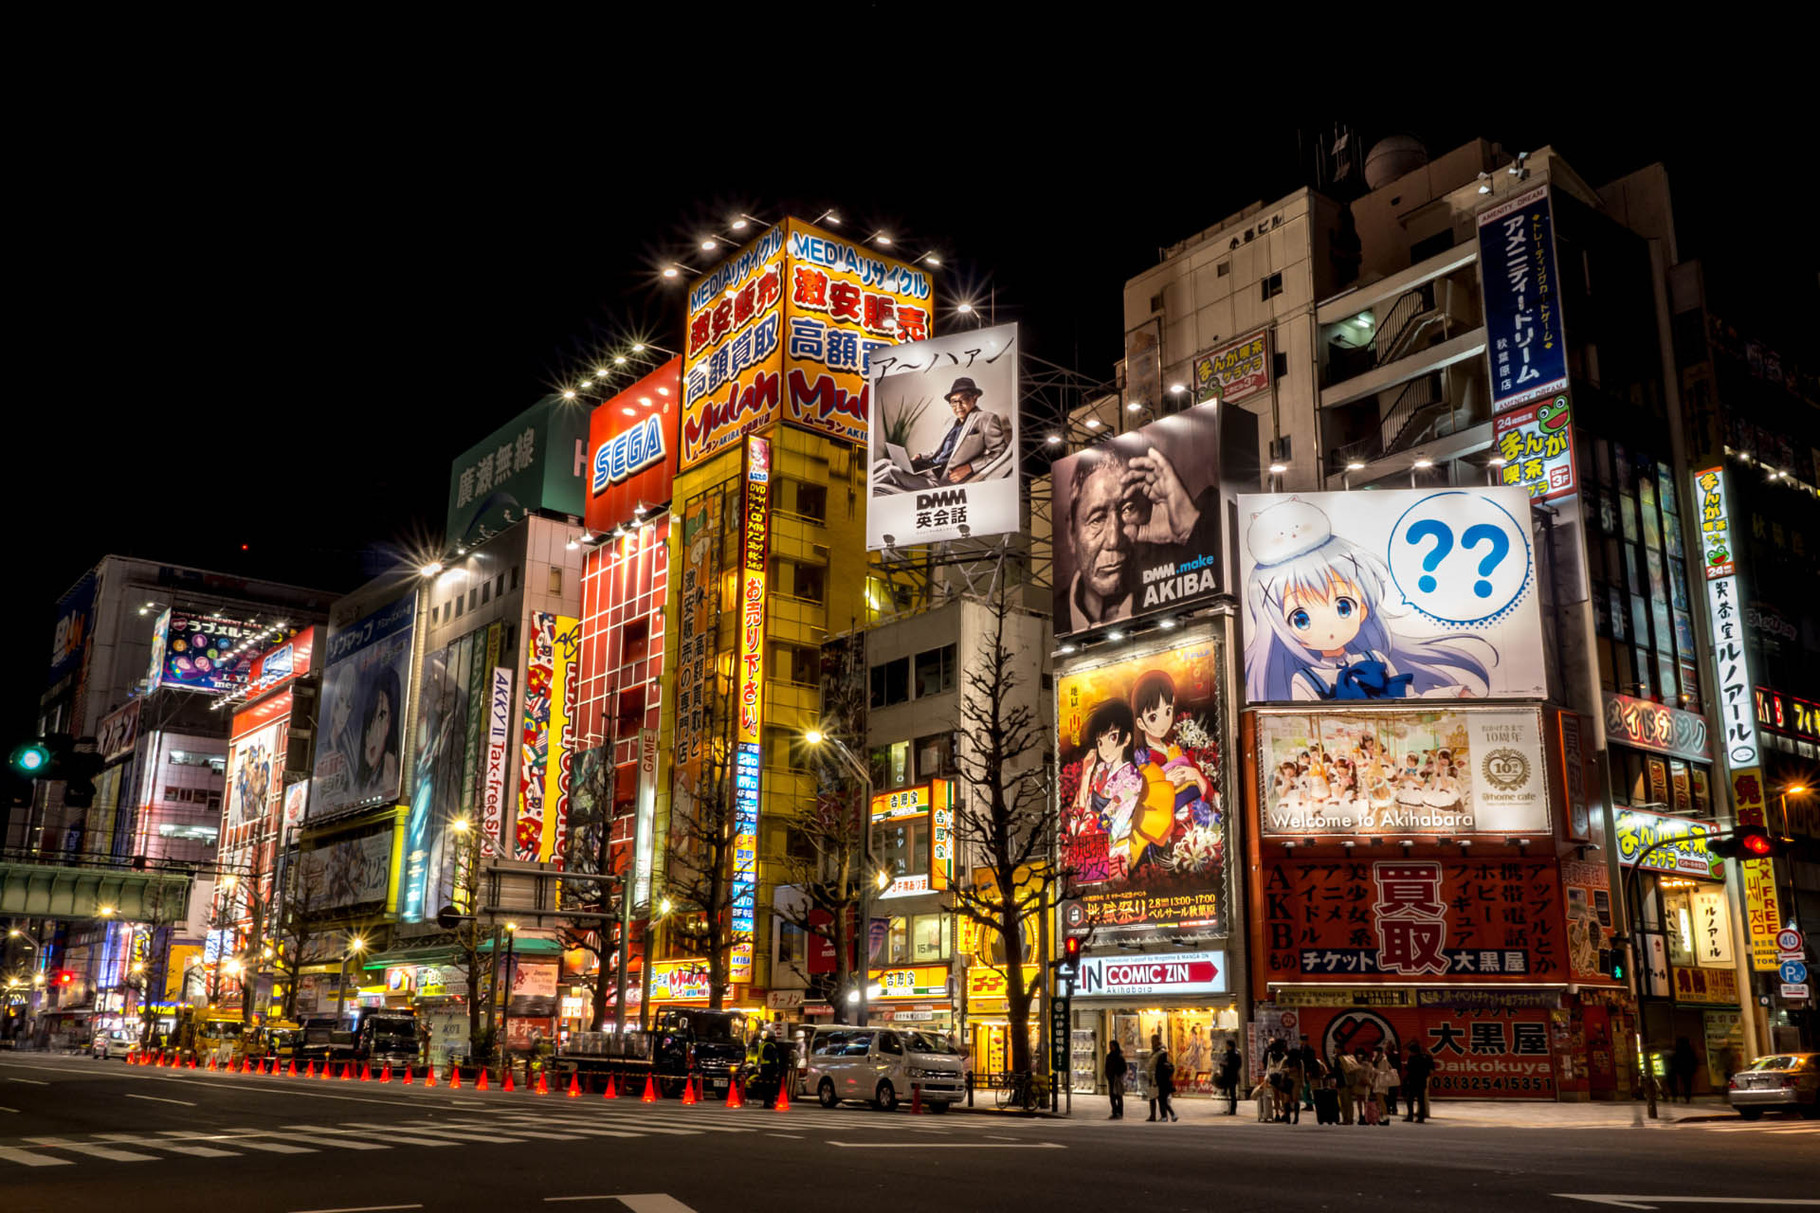 Akihabara, the "Electric city" district of Tokyo